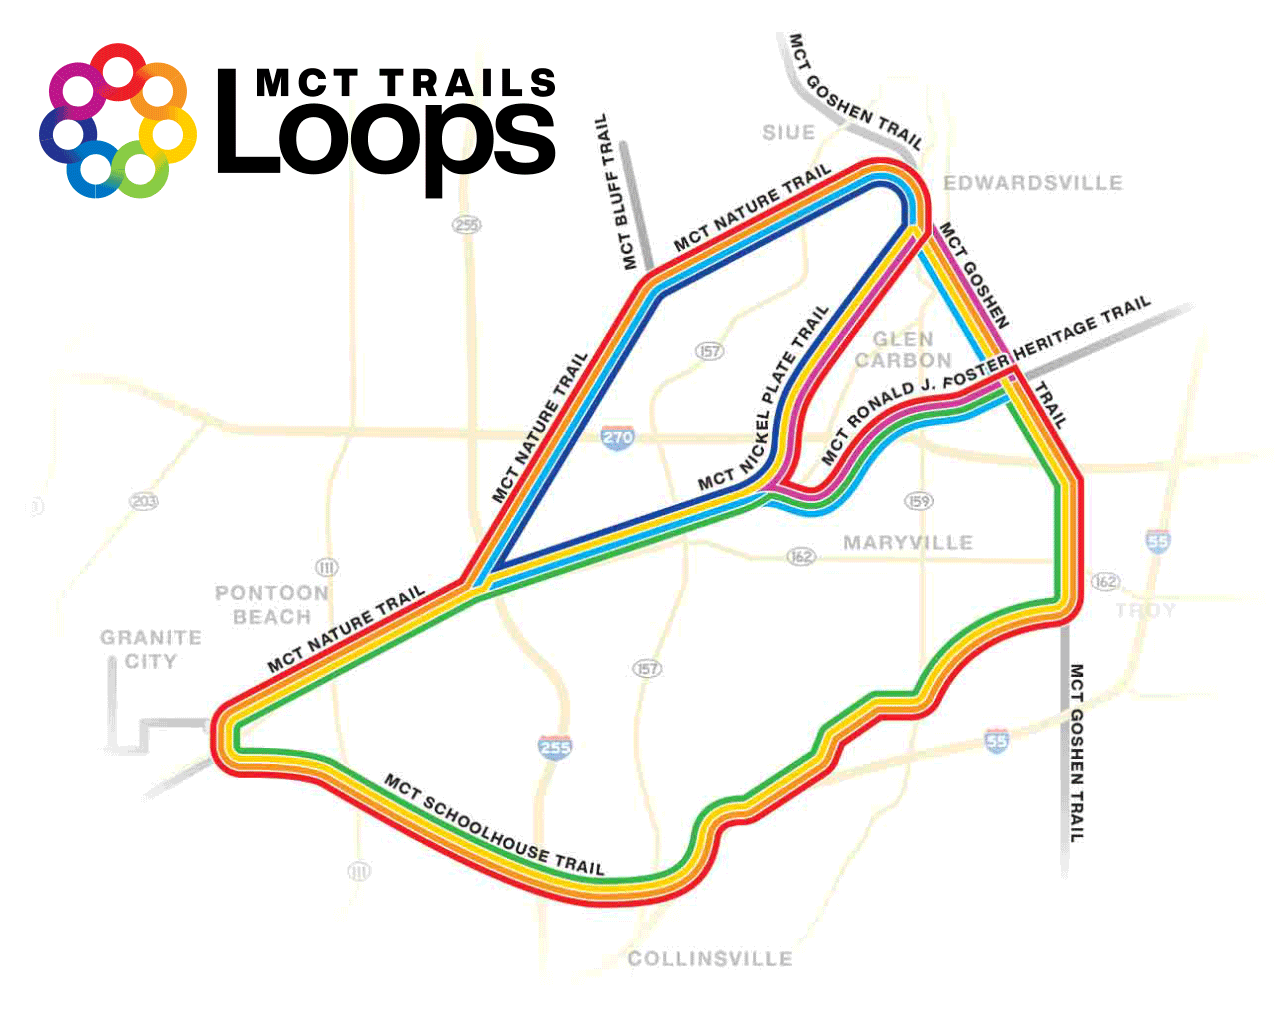 Explore the Loops